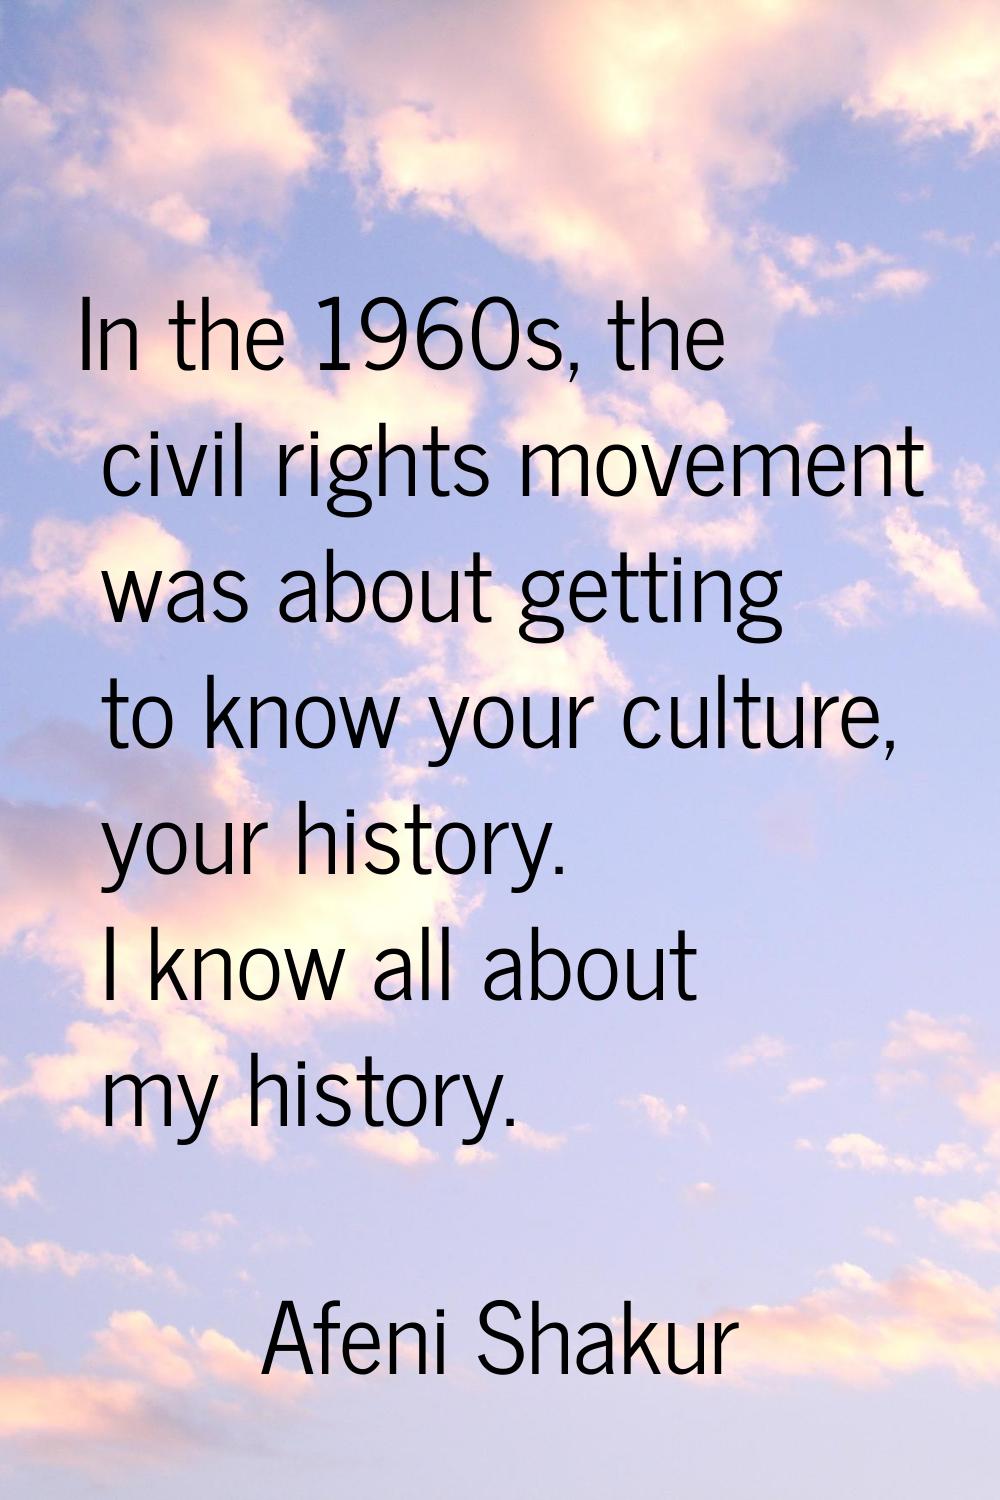 In the 1960s, the civil rights movement was about getting to know your culture, your history. I kno